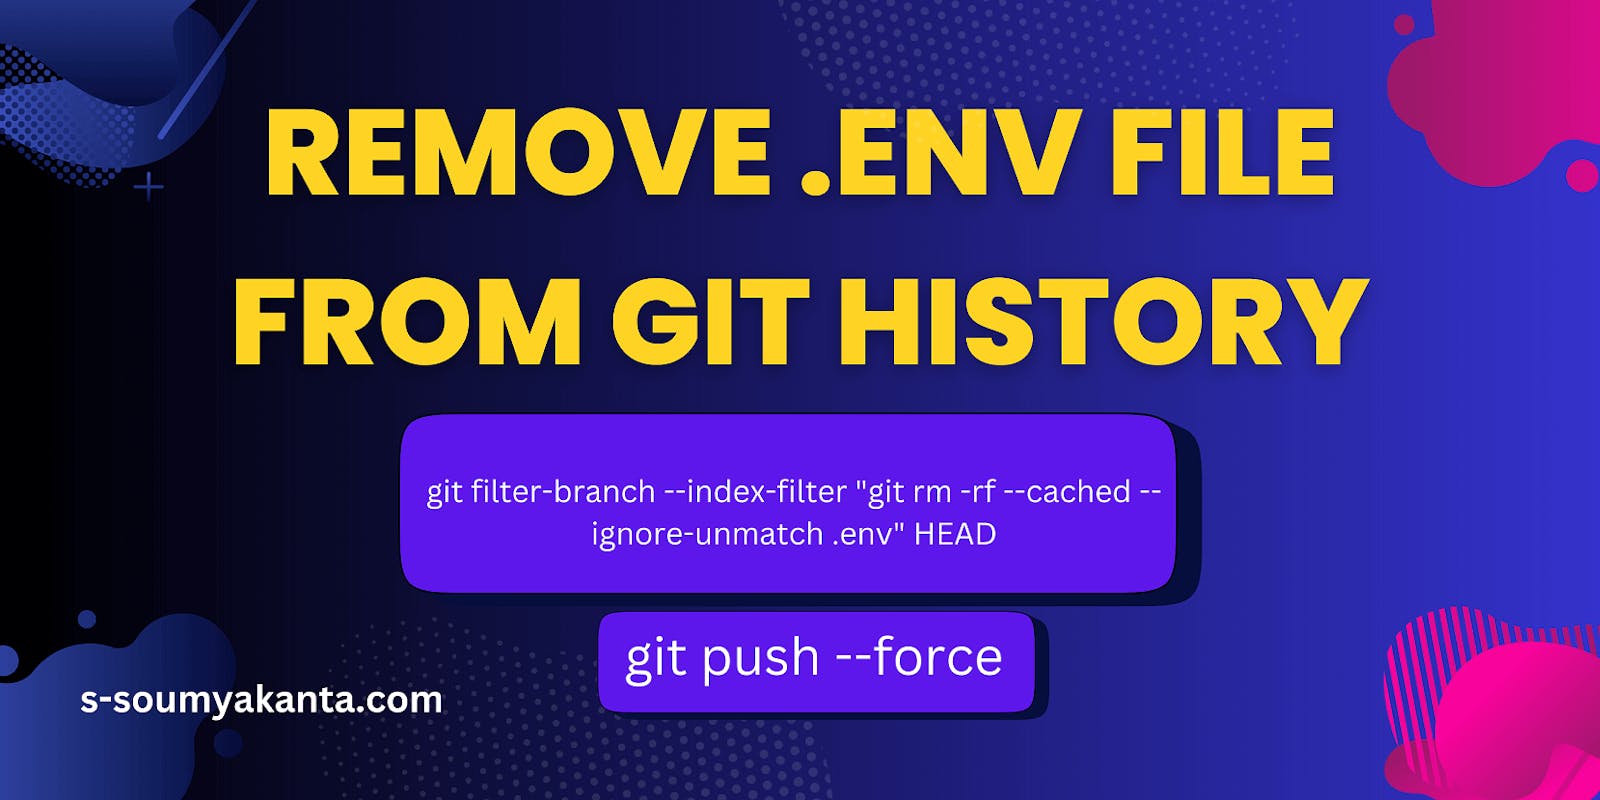 How to Remove Accidentally Pushed .env File in Git History